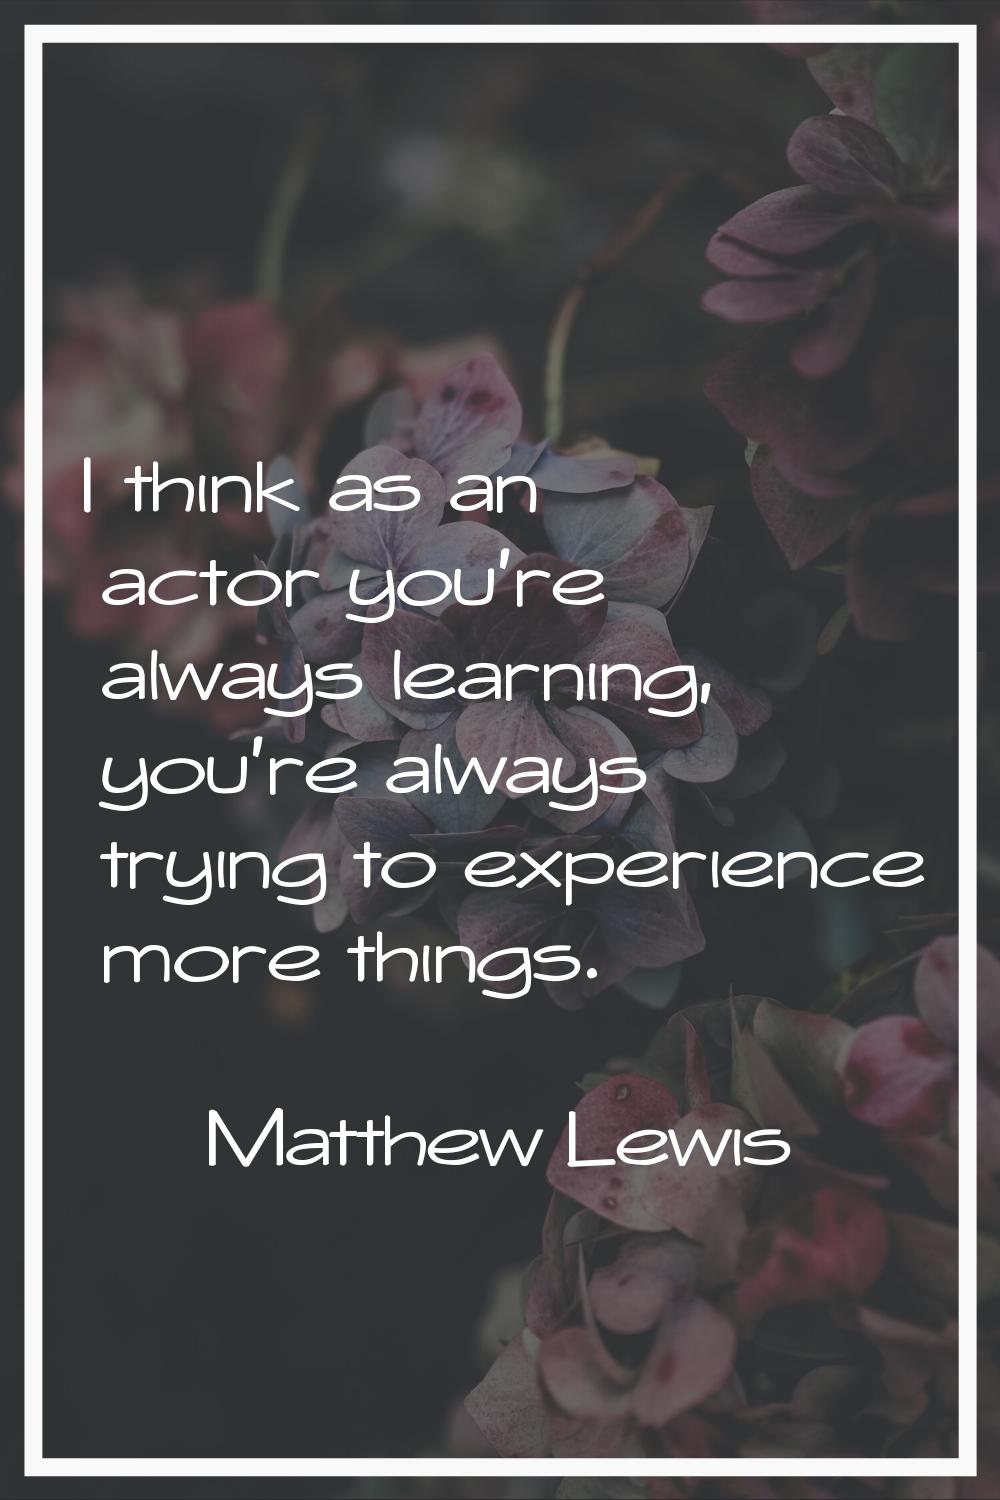 I think as an actor you're always learning, you're always trying to experience more things.